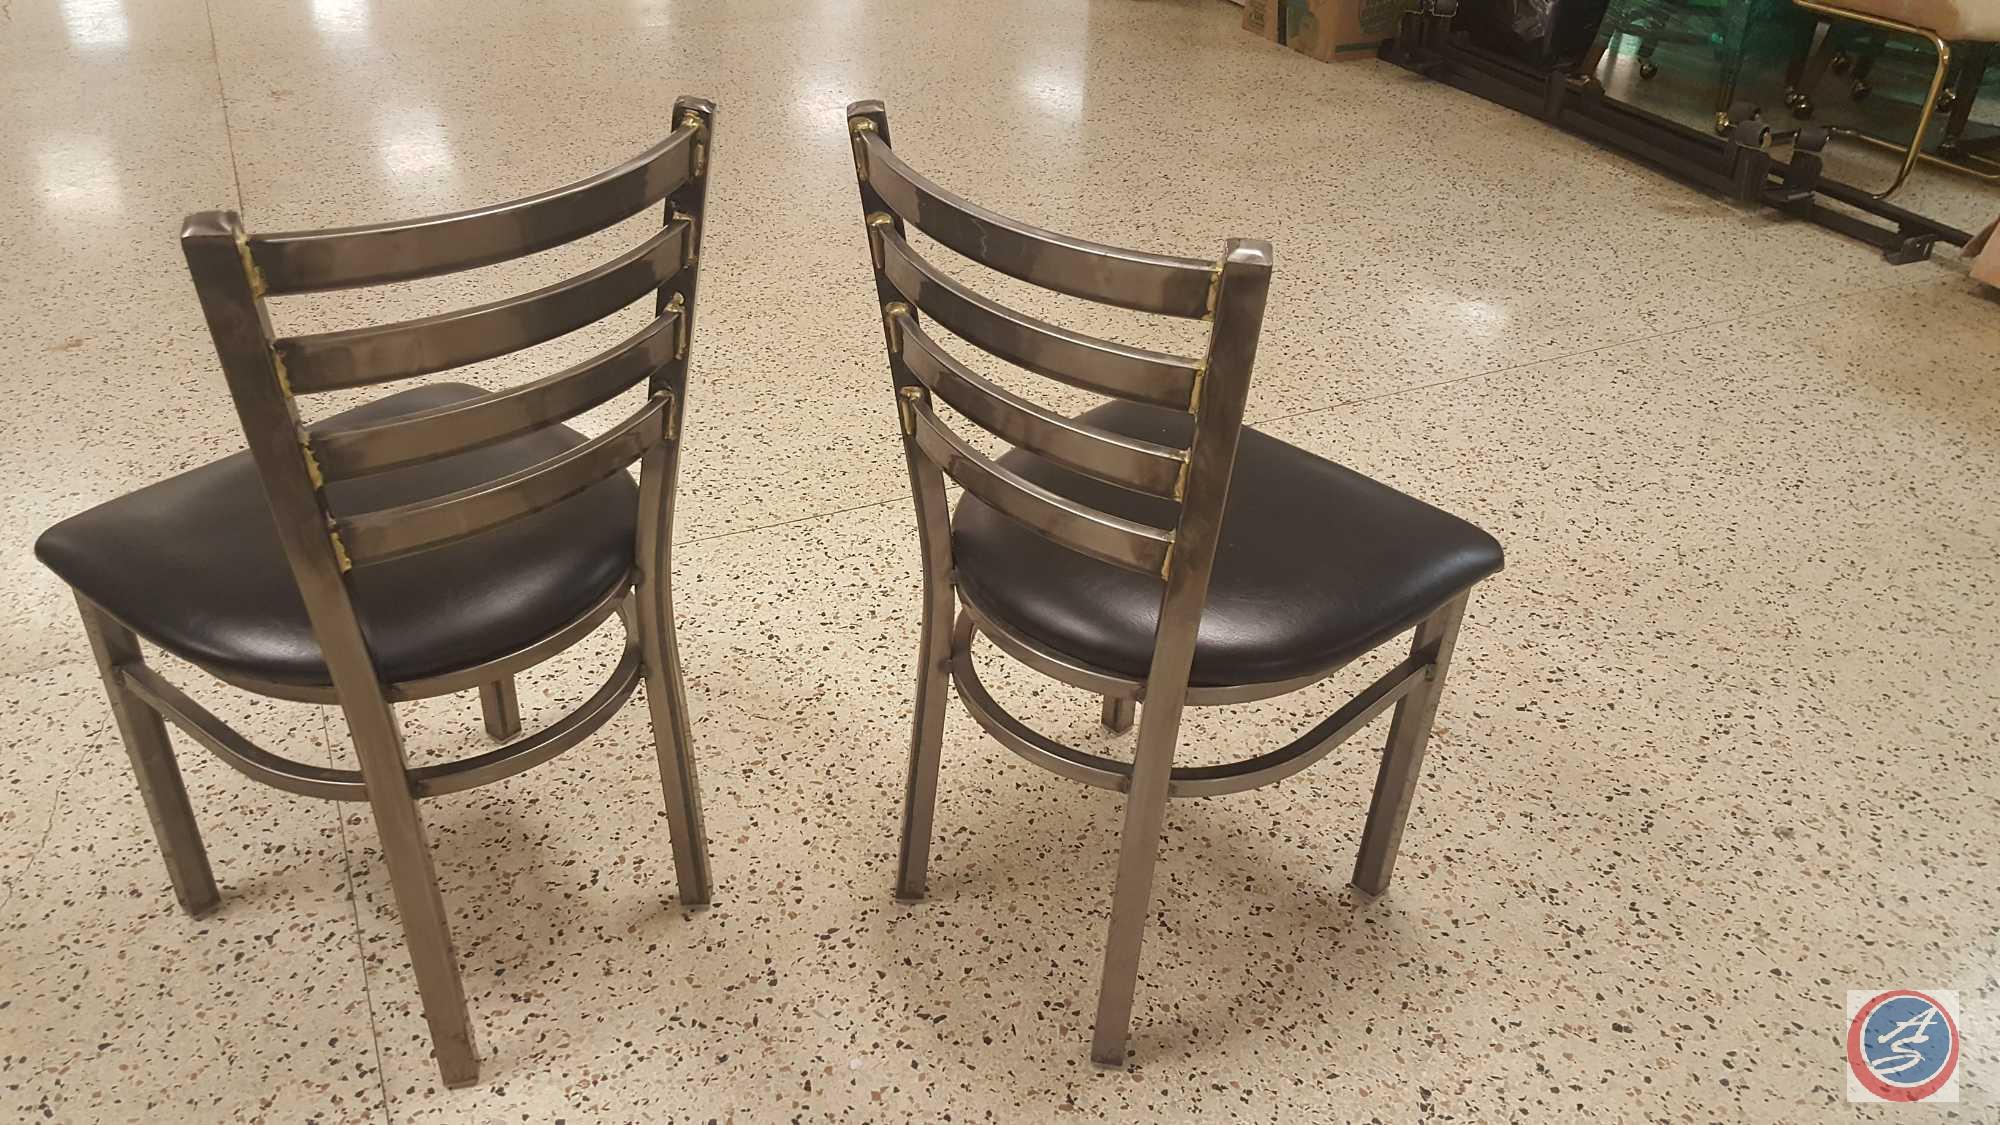 {{8X$BID}} (8) Welded Metal Frame Ladder Back Restaurant Chairs w/ Padded Seats {SOLD 8x THE MONEY}